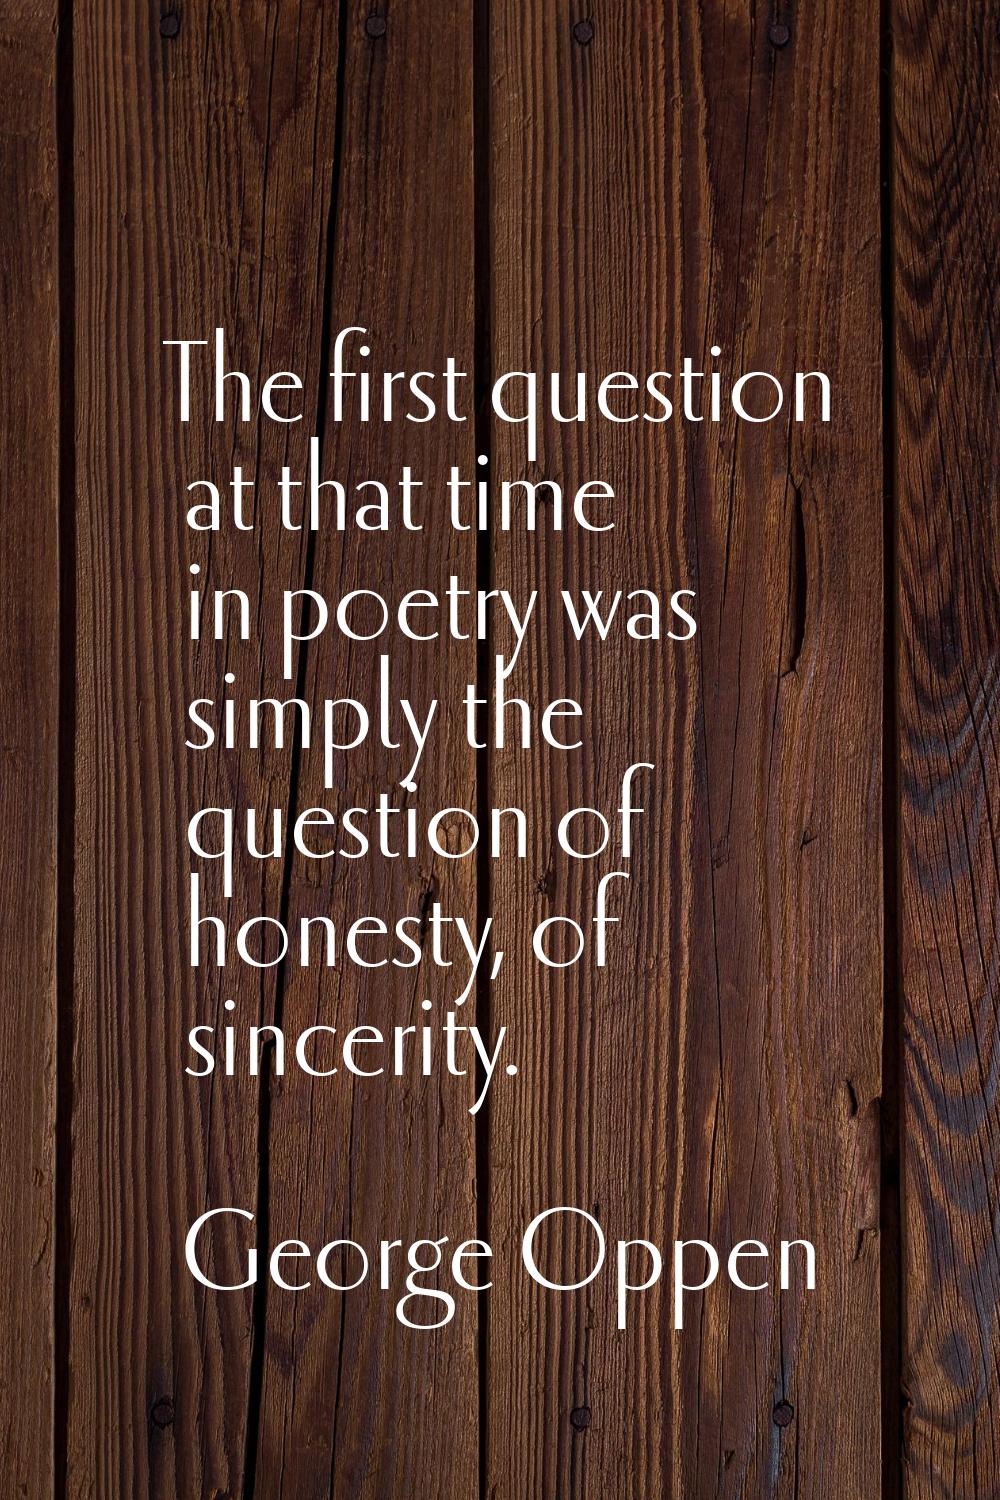 The first question at that time in poetry was simply the question of honesty, of sincerity.